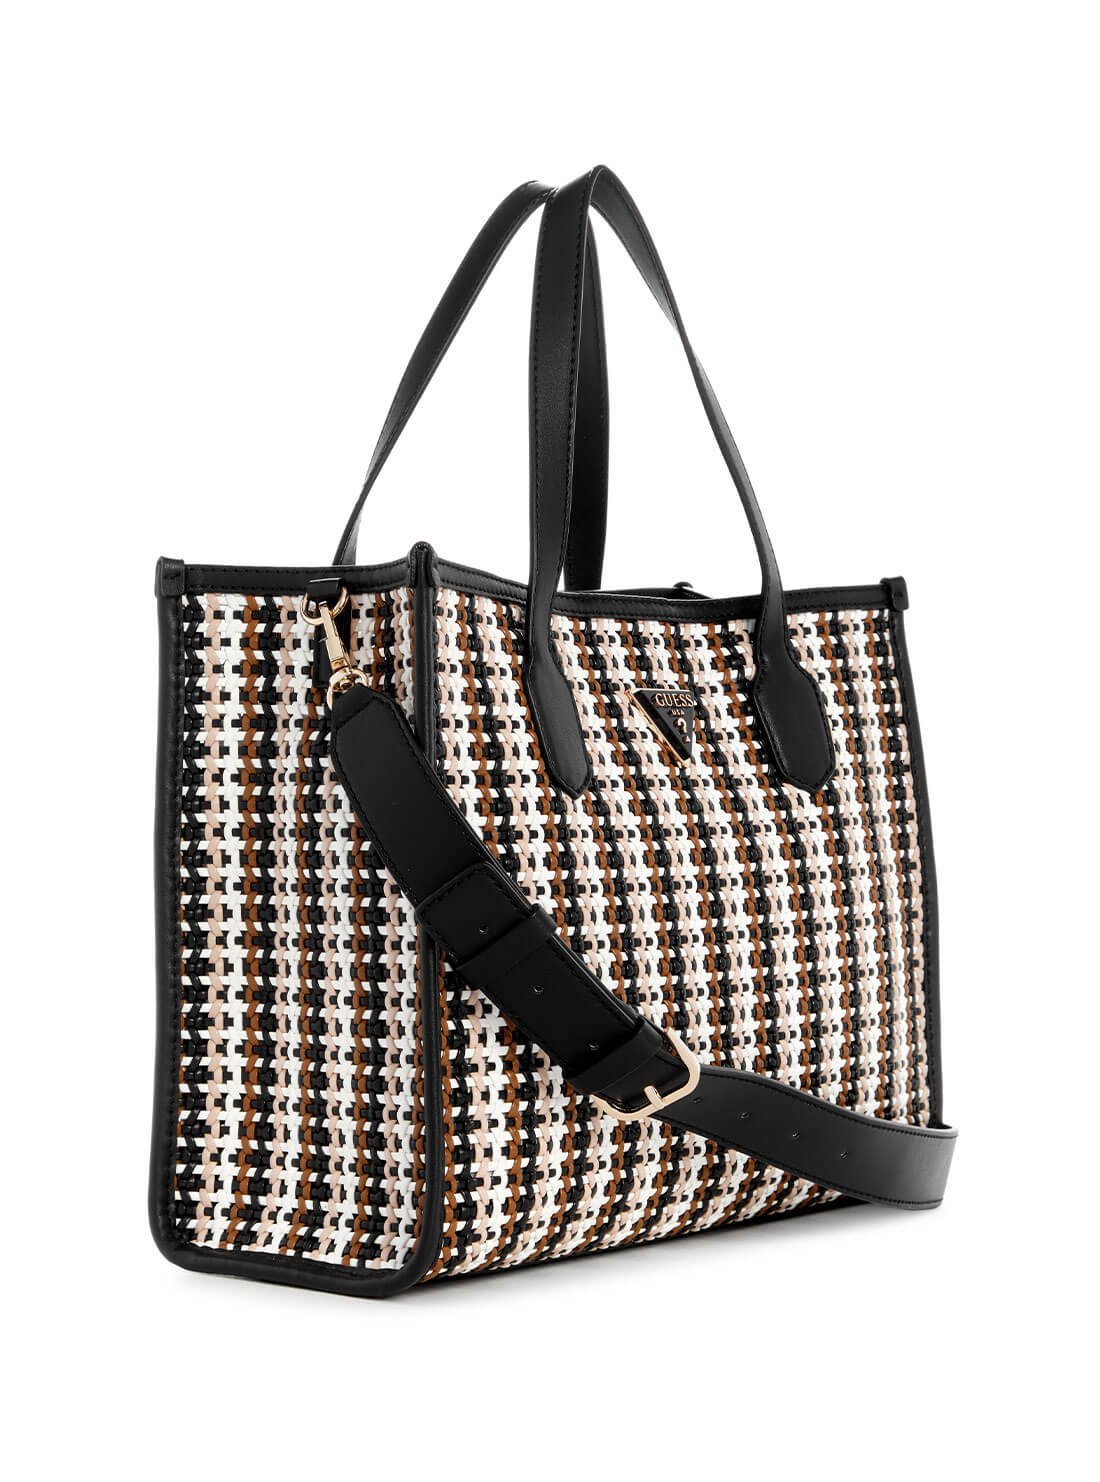 GUESS Black Multi Woven Silvana Tote Bag side view